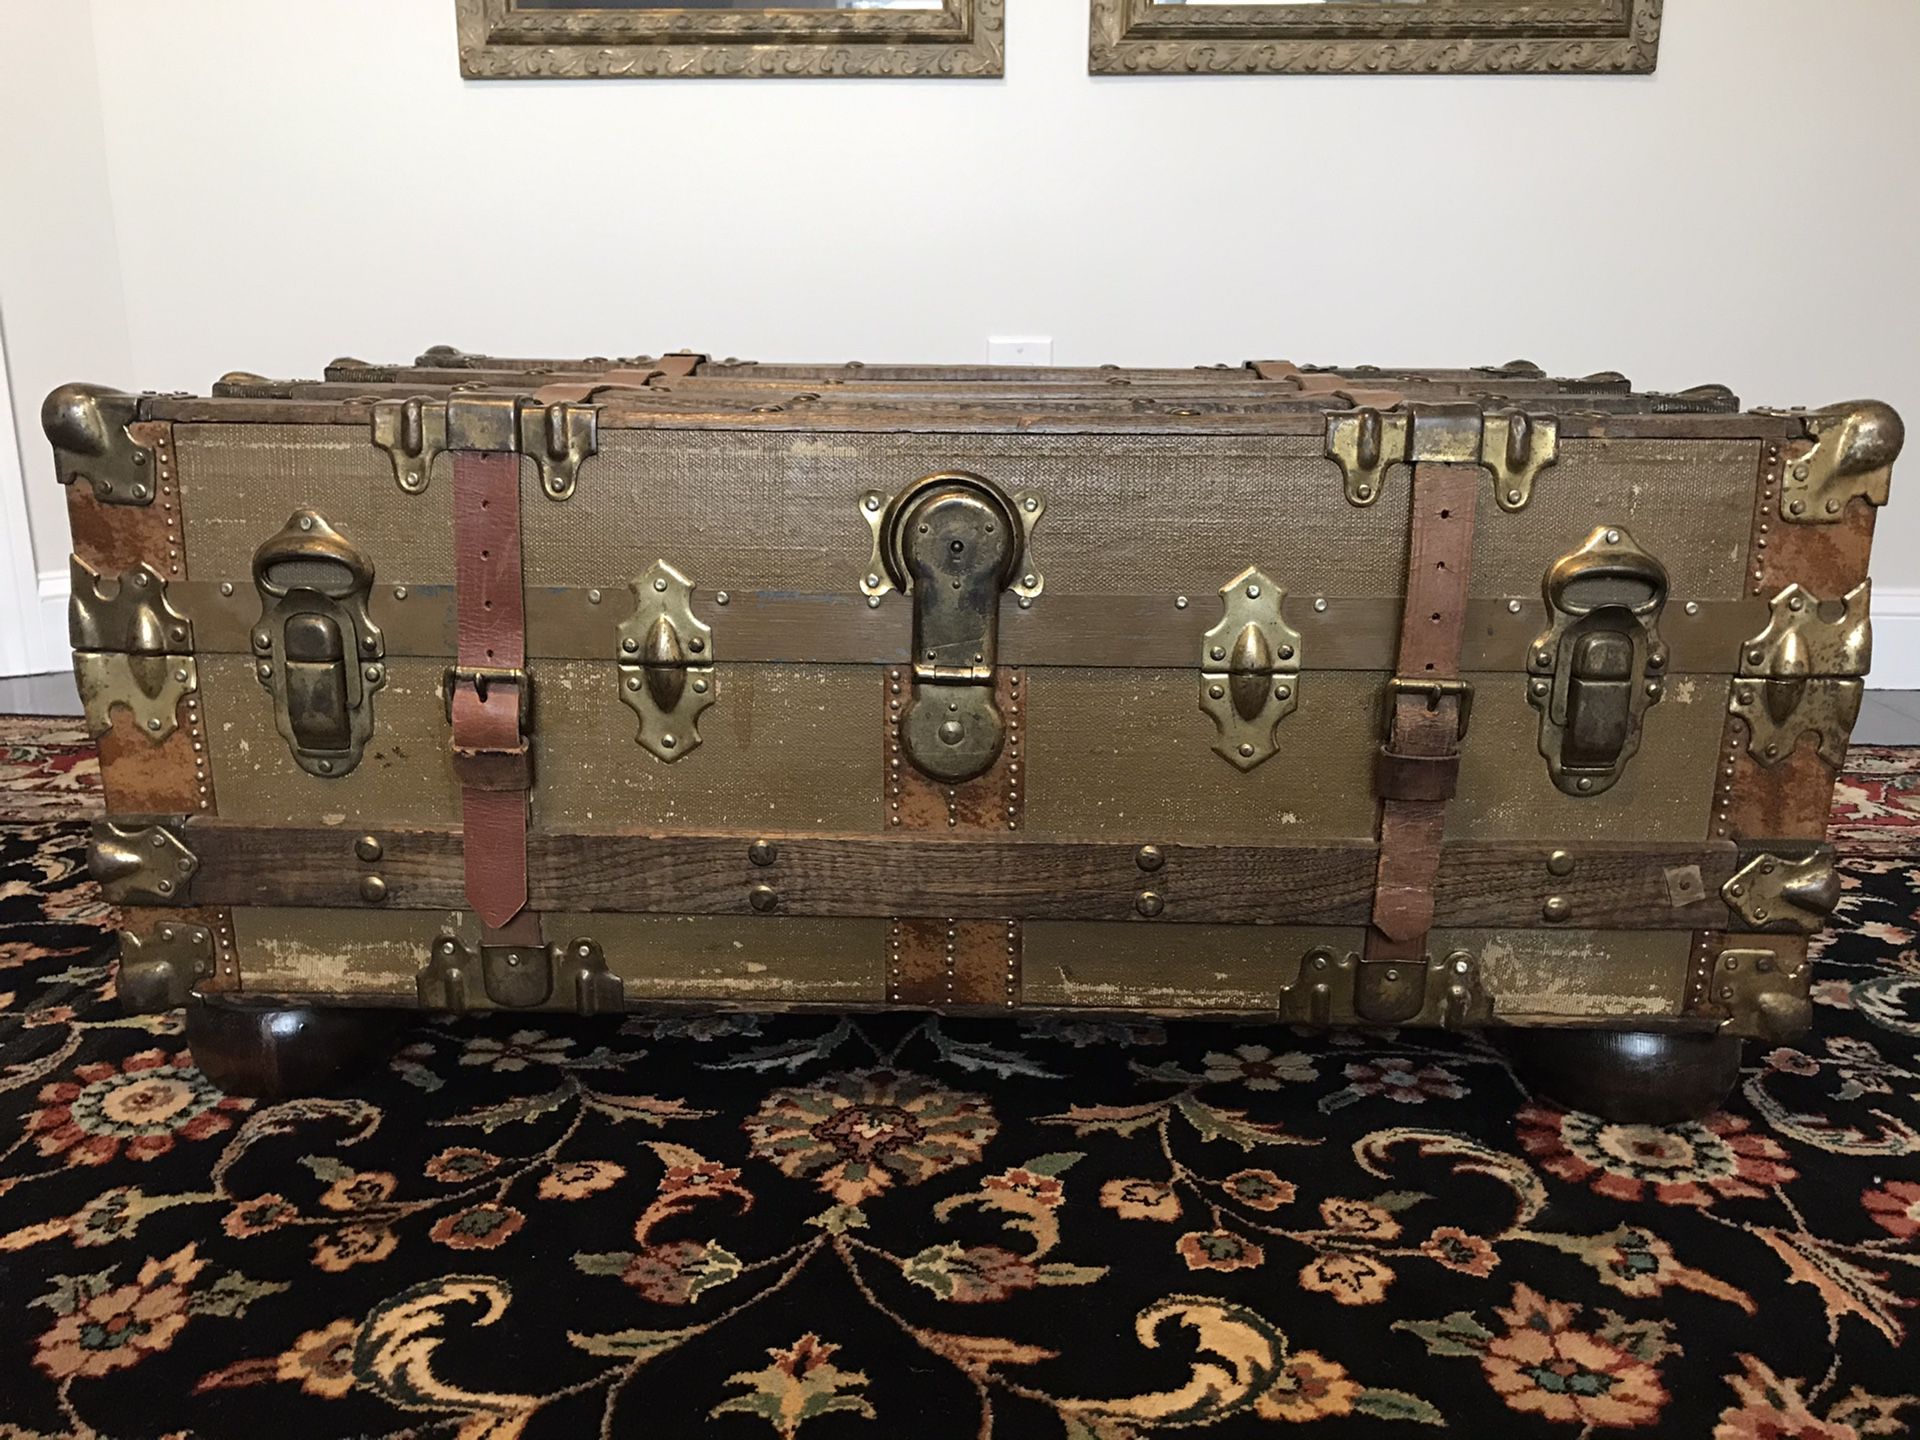 Antique Vintage Steamer Trunk with heavy glass top and optional hardwood bun feet for use as a coffee table.